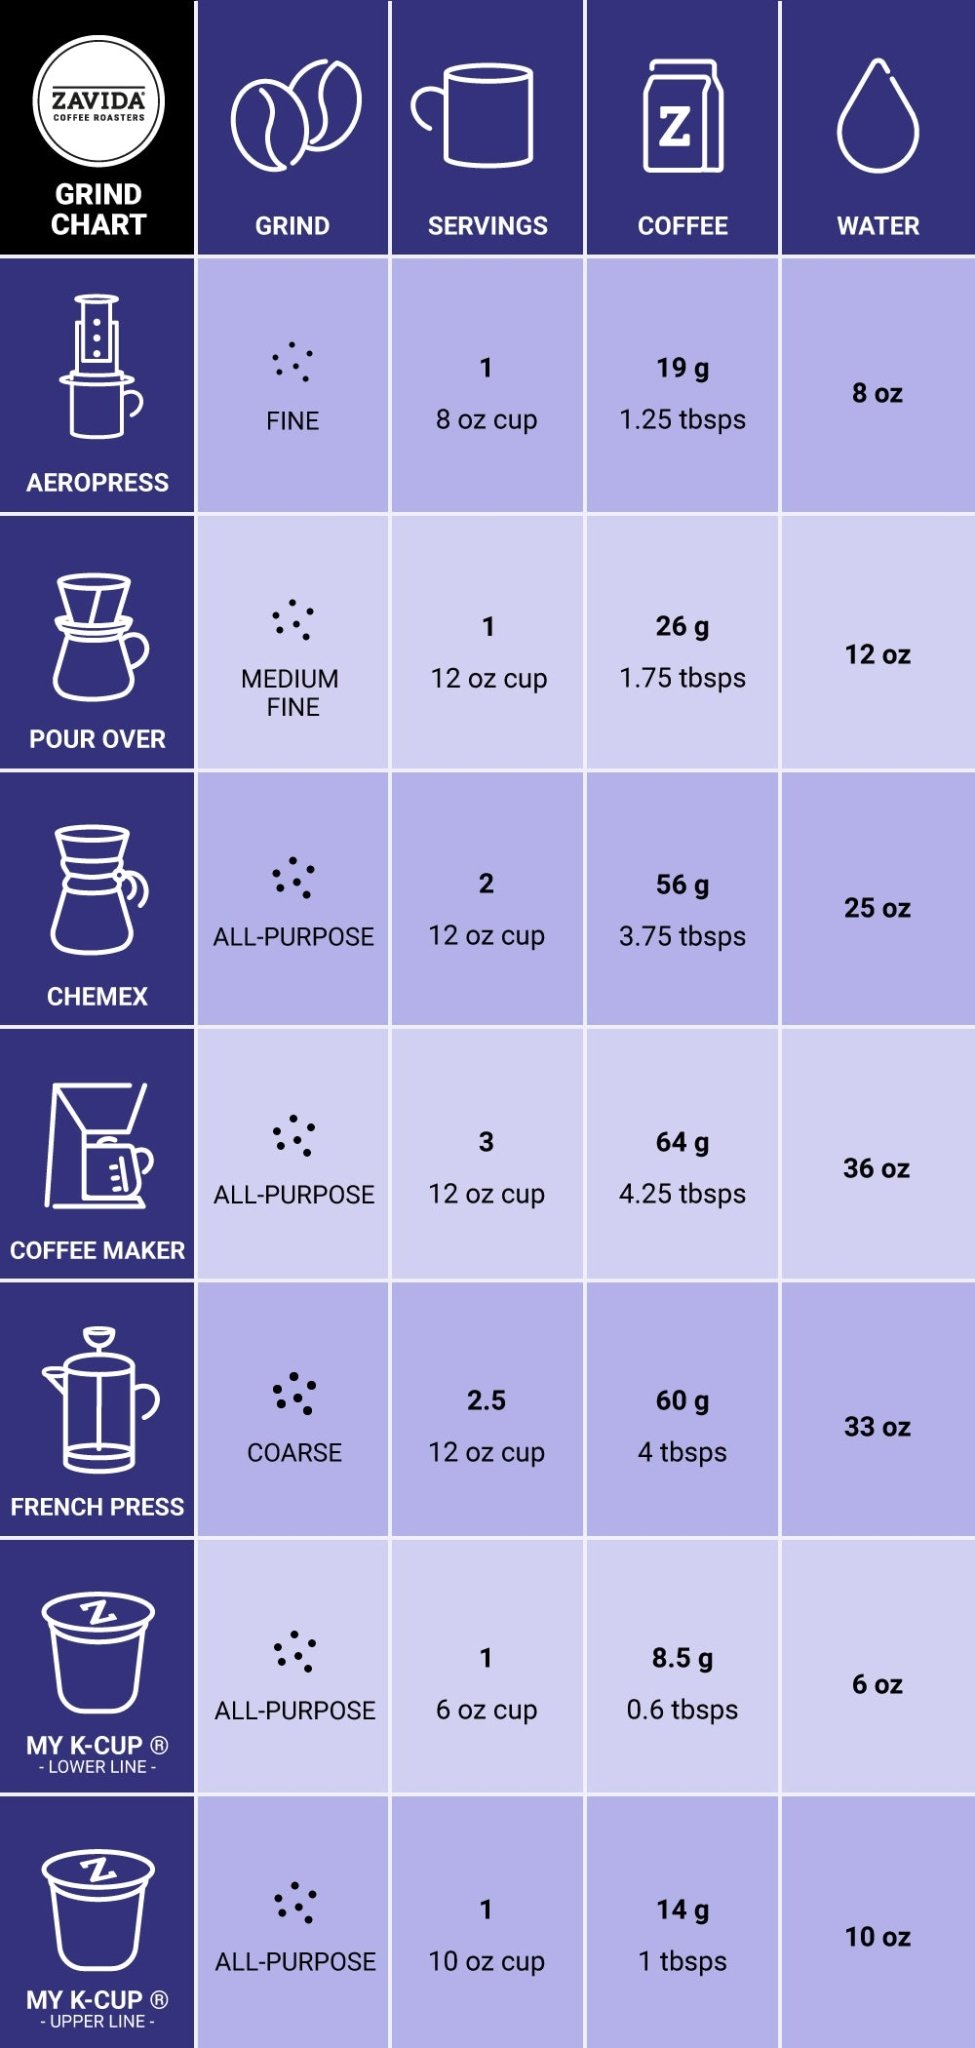 Zavida's grind chart for how to brew the perfect cup of coffee